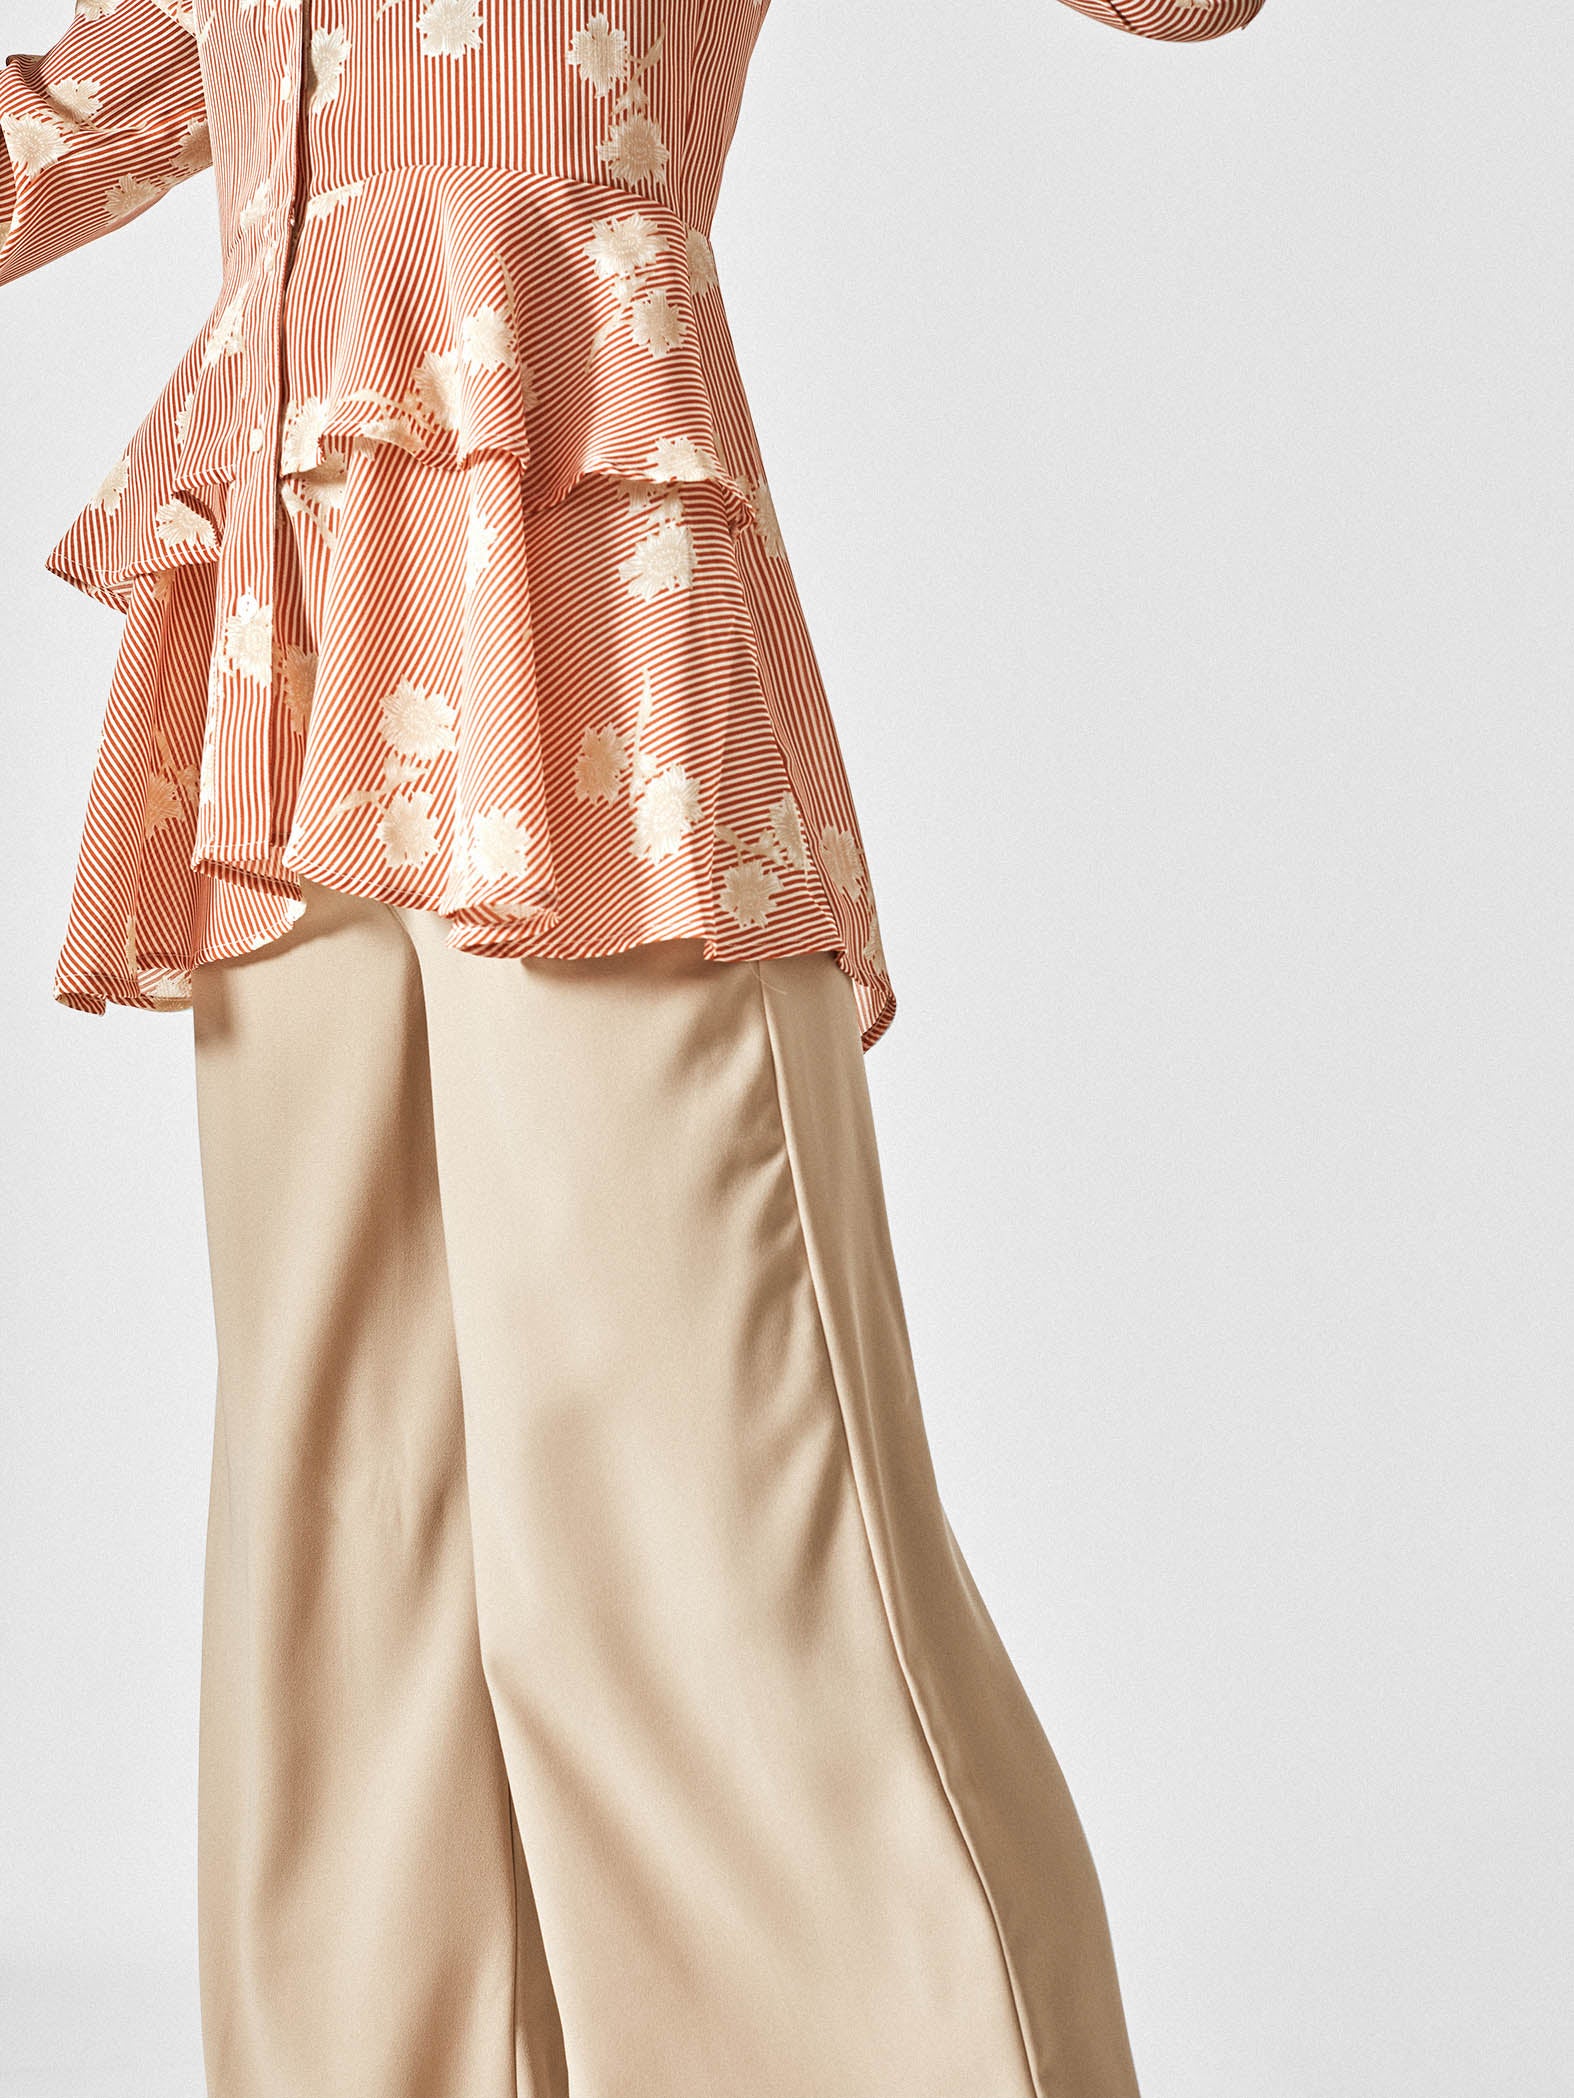 Tangerine Floral Tiered Shirt